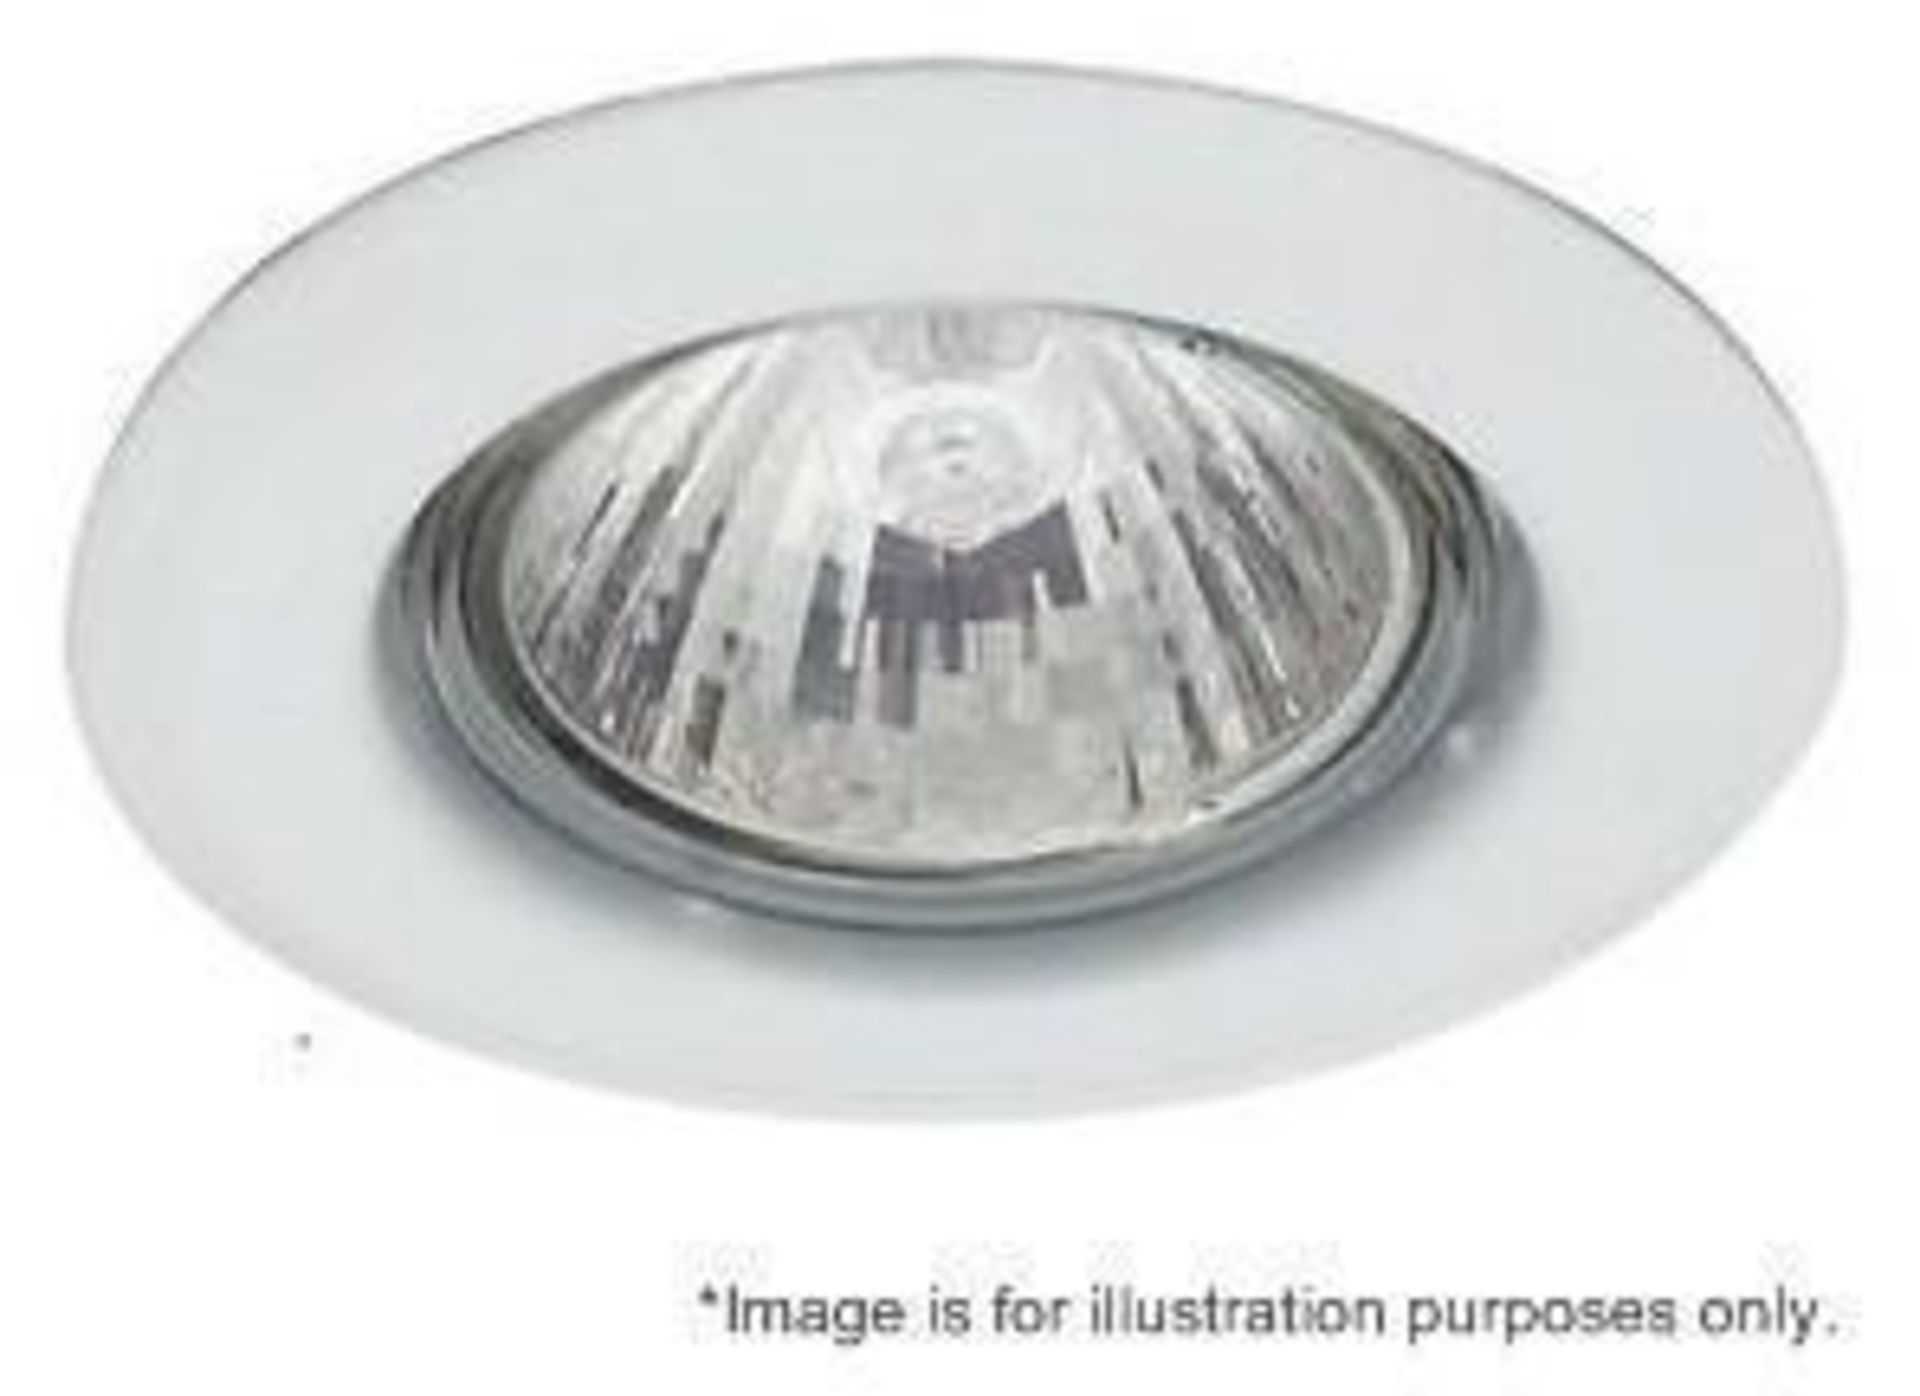 10 x Smac-lite FLAMESURE Low Voltage Fire Rated Downlight Kits - Model: FA-LV2KIT - IP20 - Includes